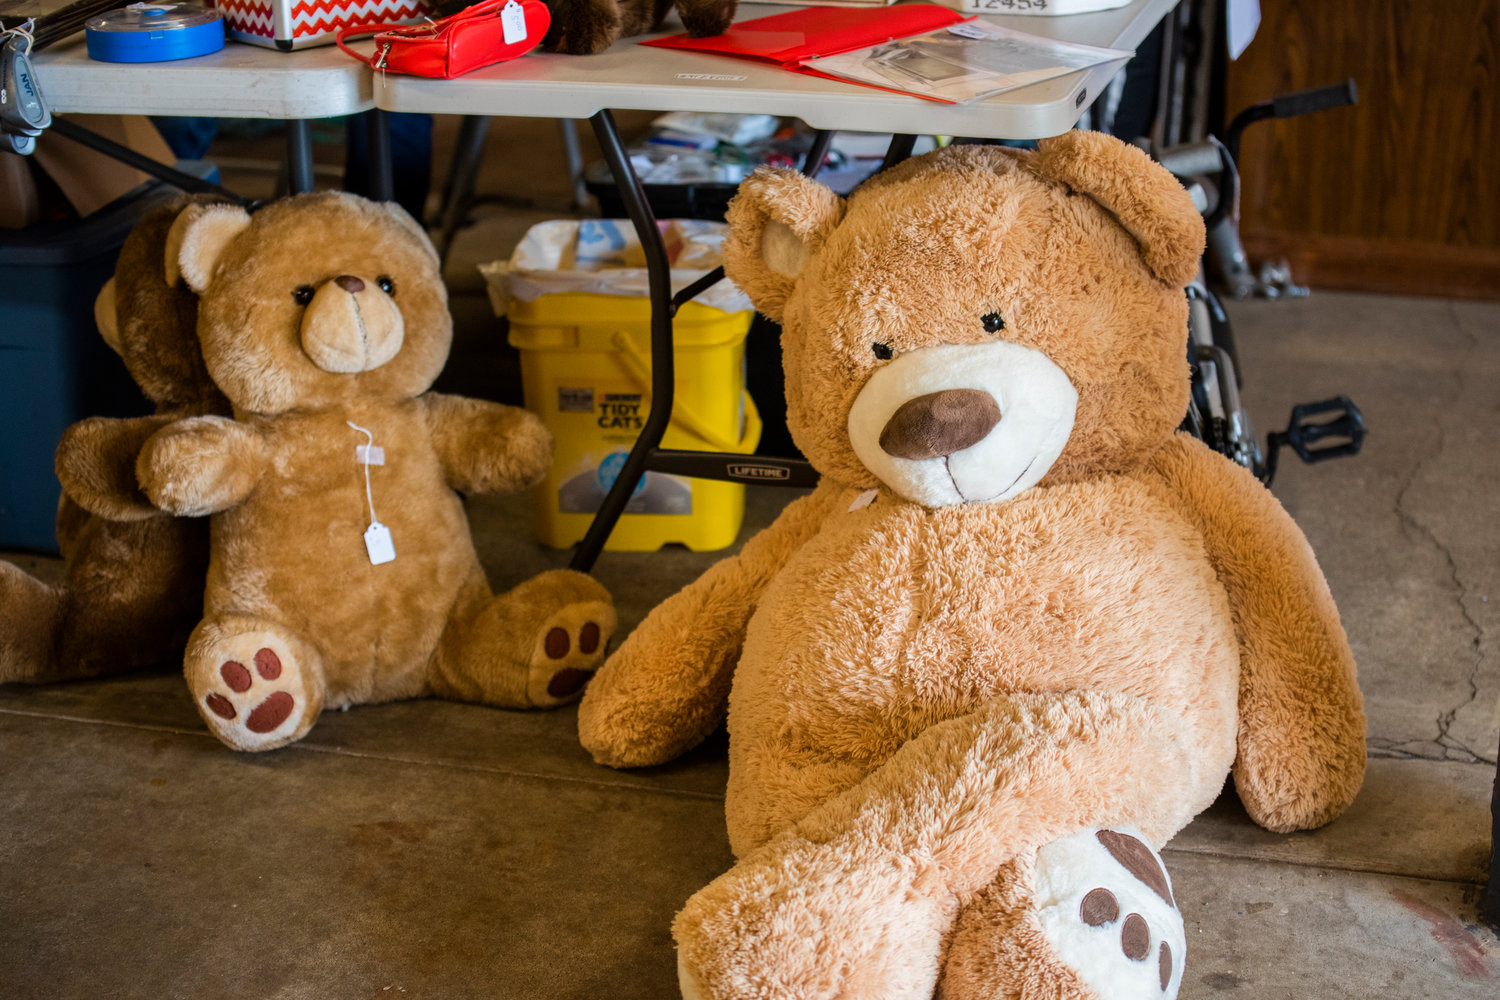 Stuffed bears are marked with price tags at the Southwest Washington Fairgrounds in Centralia on Friday during the Spring Community Garage Sale.